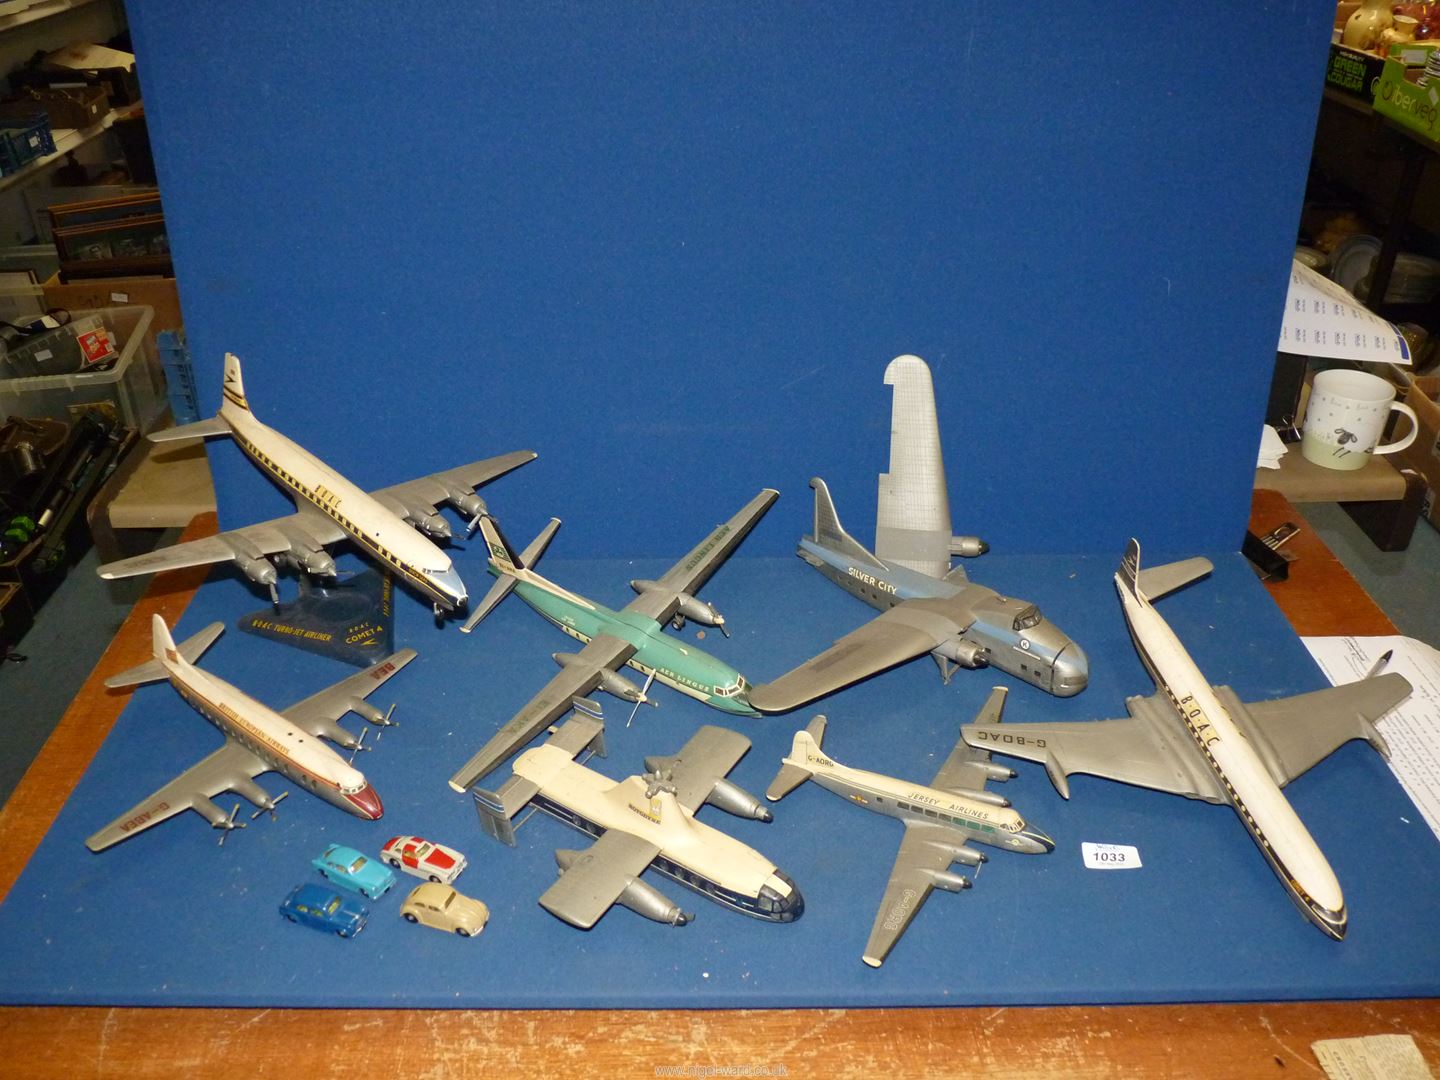 A quantity of old Airfix model commercial airline Aeroplanes including B.O.A.